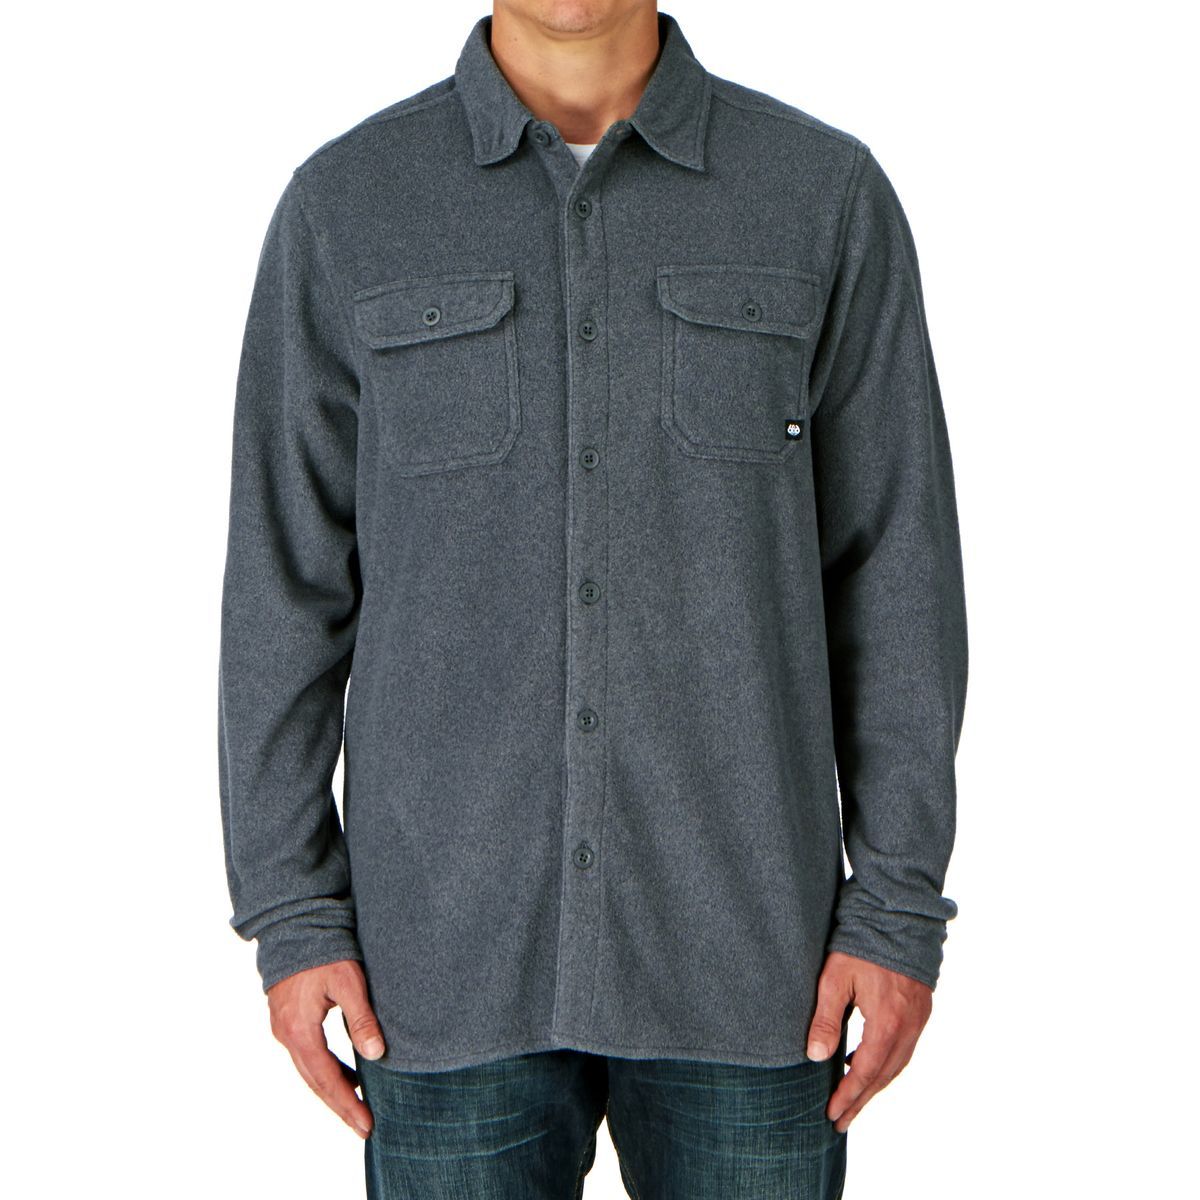 Airflght Rodeo Button Down Top Charcoal Heather Gris Gris